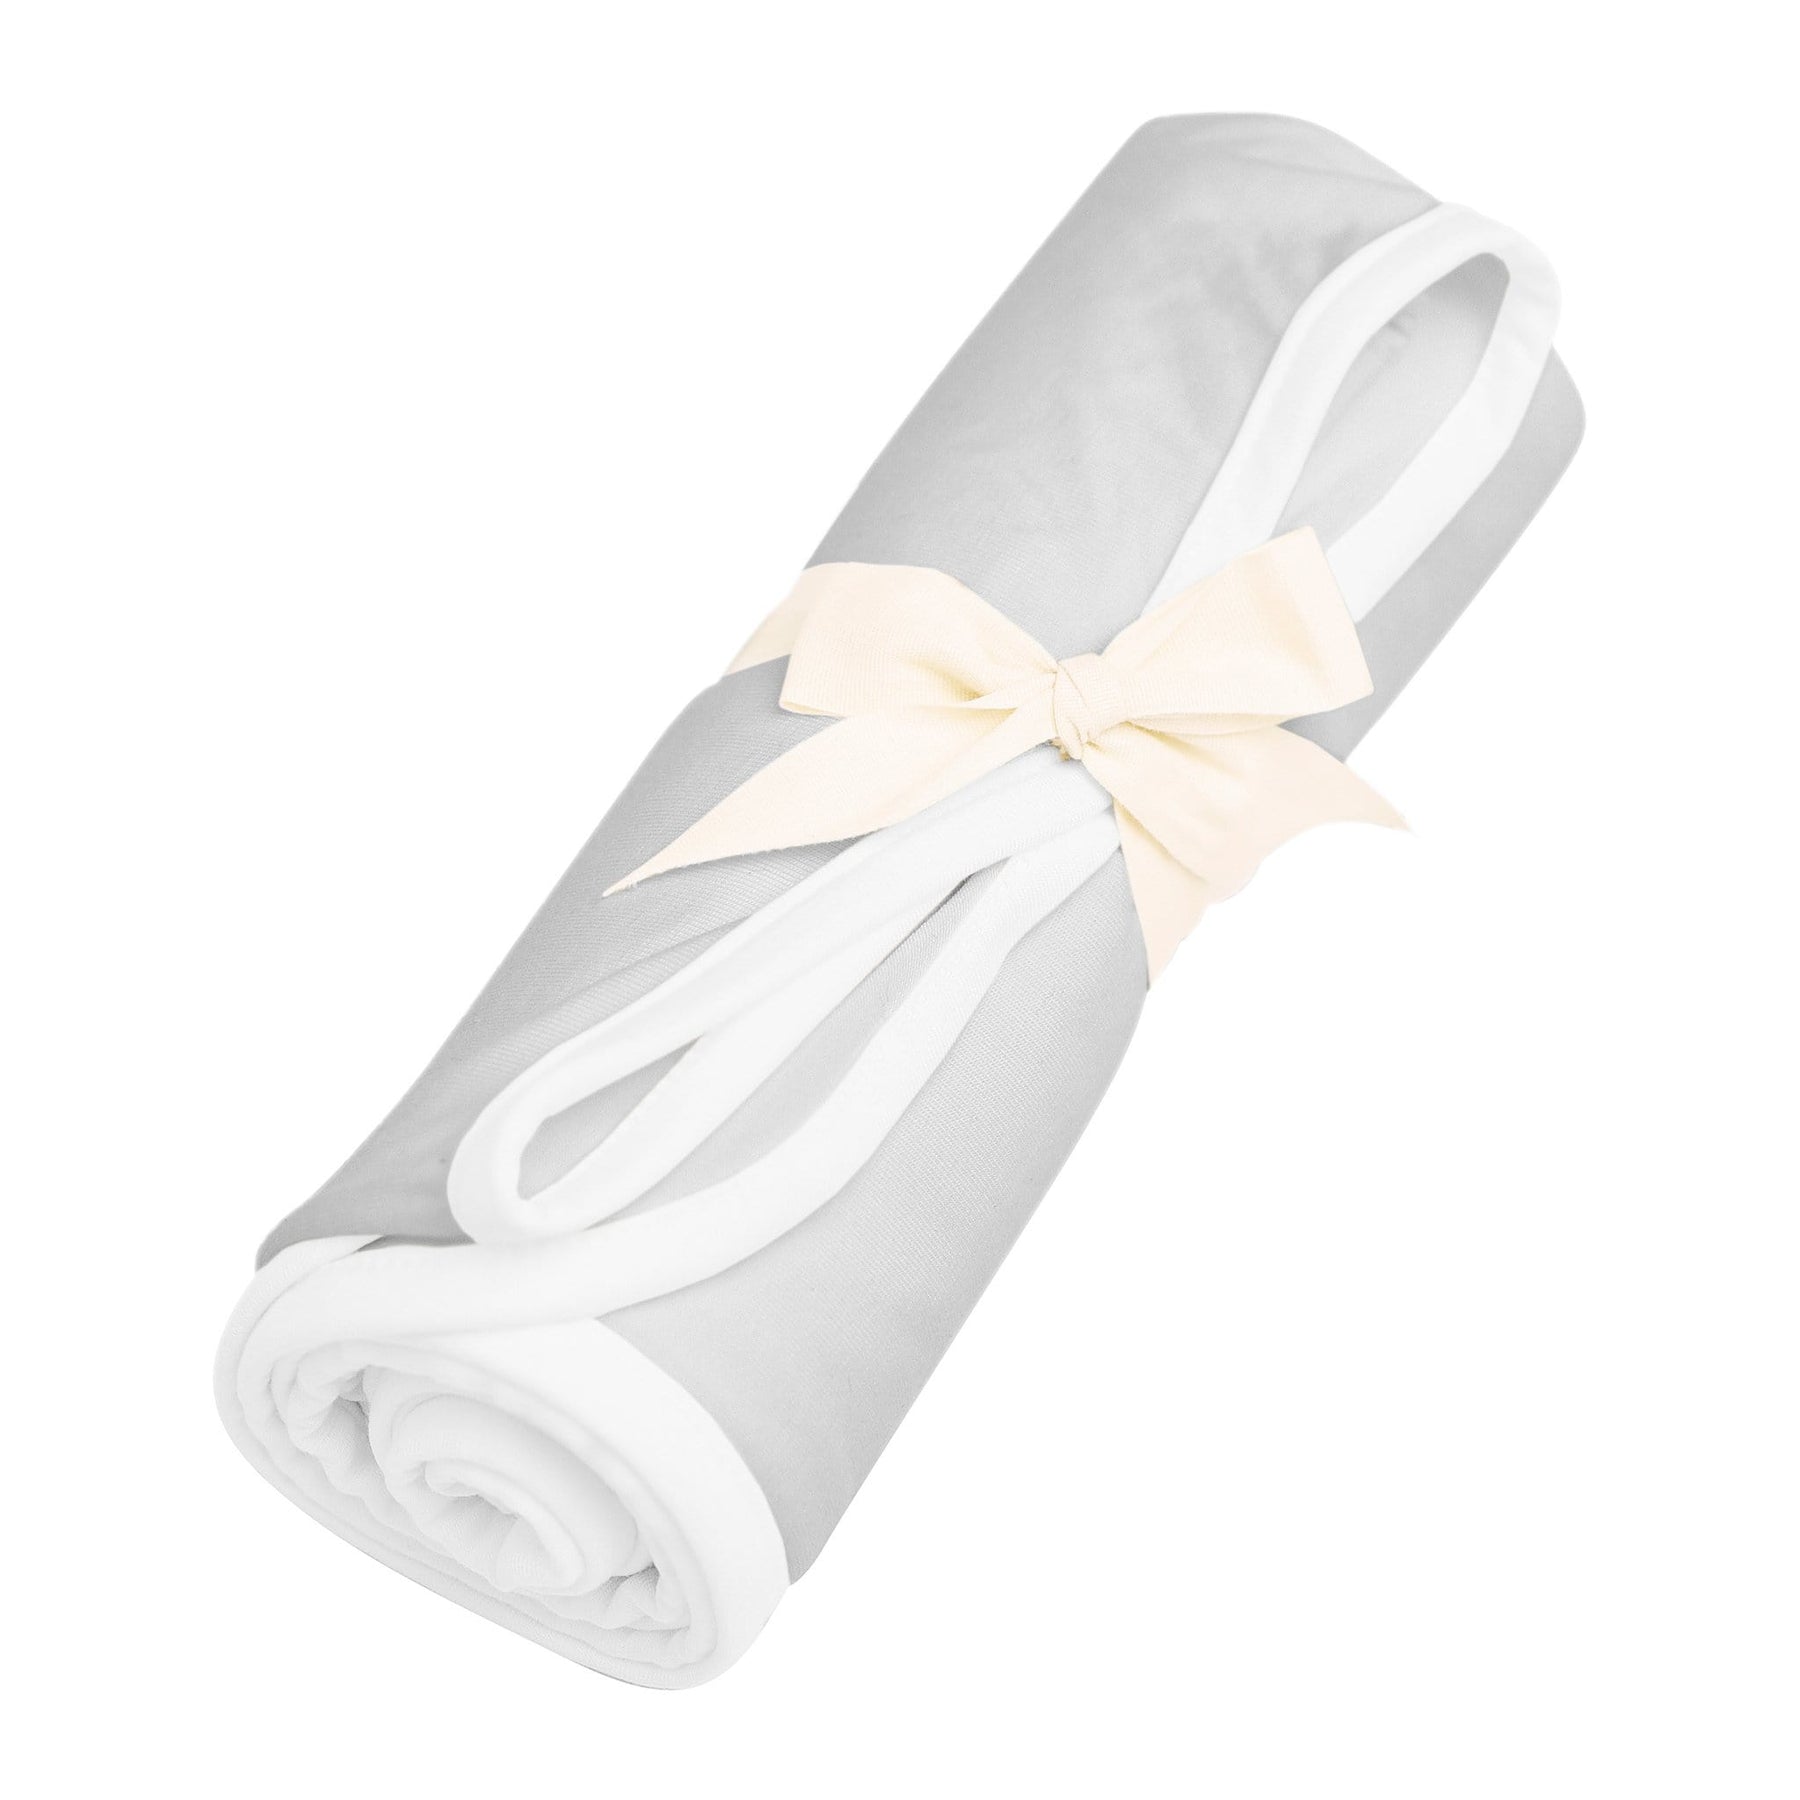 Kyte BABY Swaddling Blanket Storm with Cloud Trim / Infant Swaddle Blanket in Storm with Cloud Trim